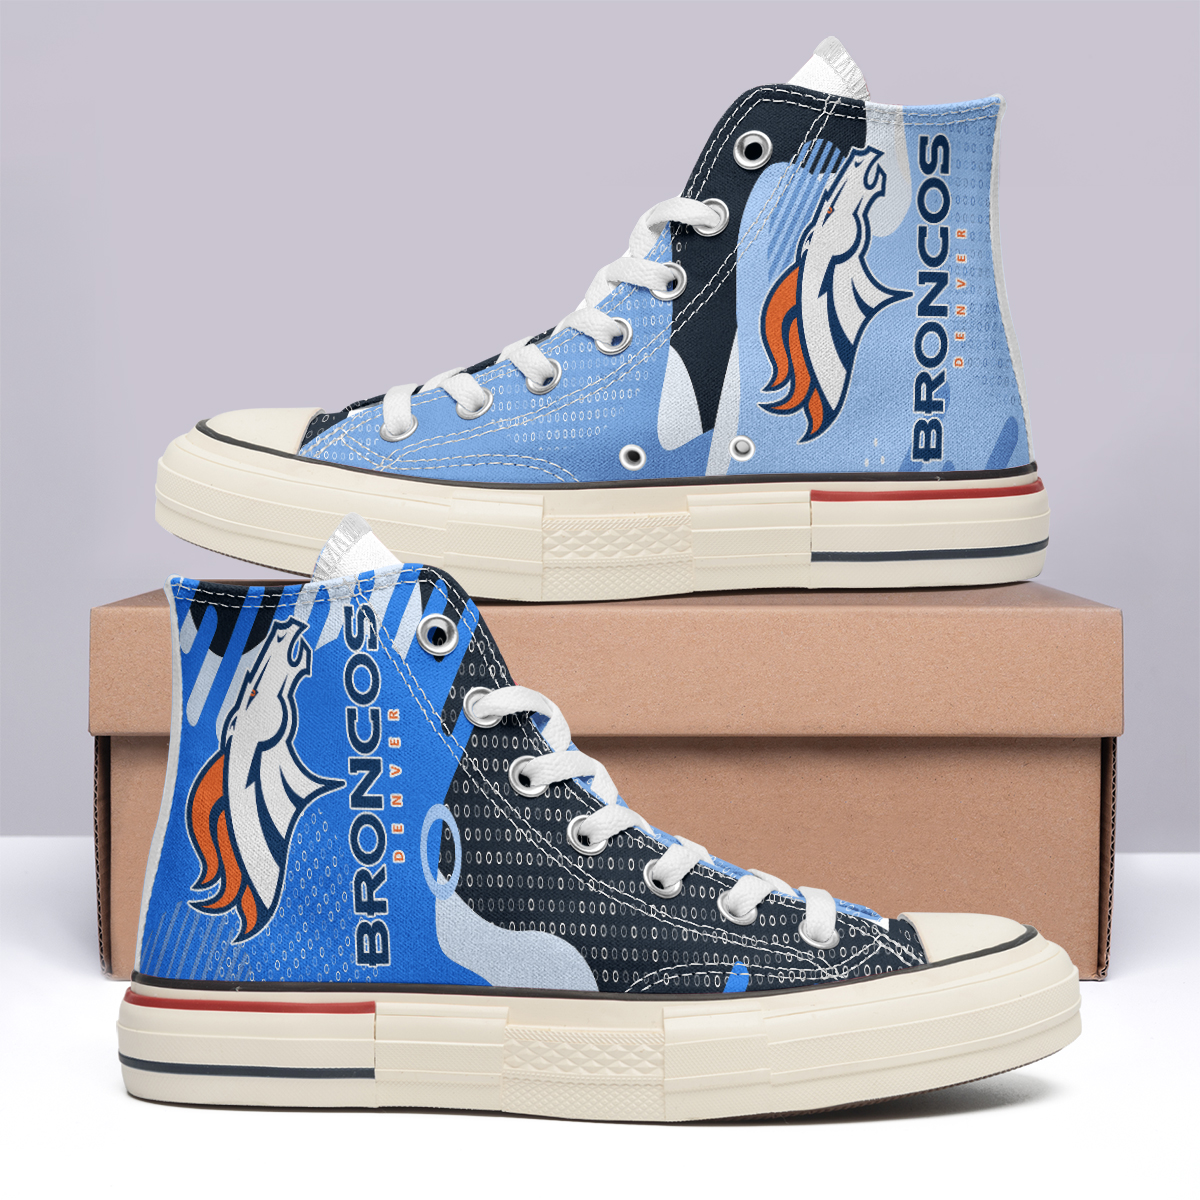 Los Angeles Chargers High Top Canvas Shoes Special Edition